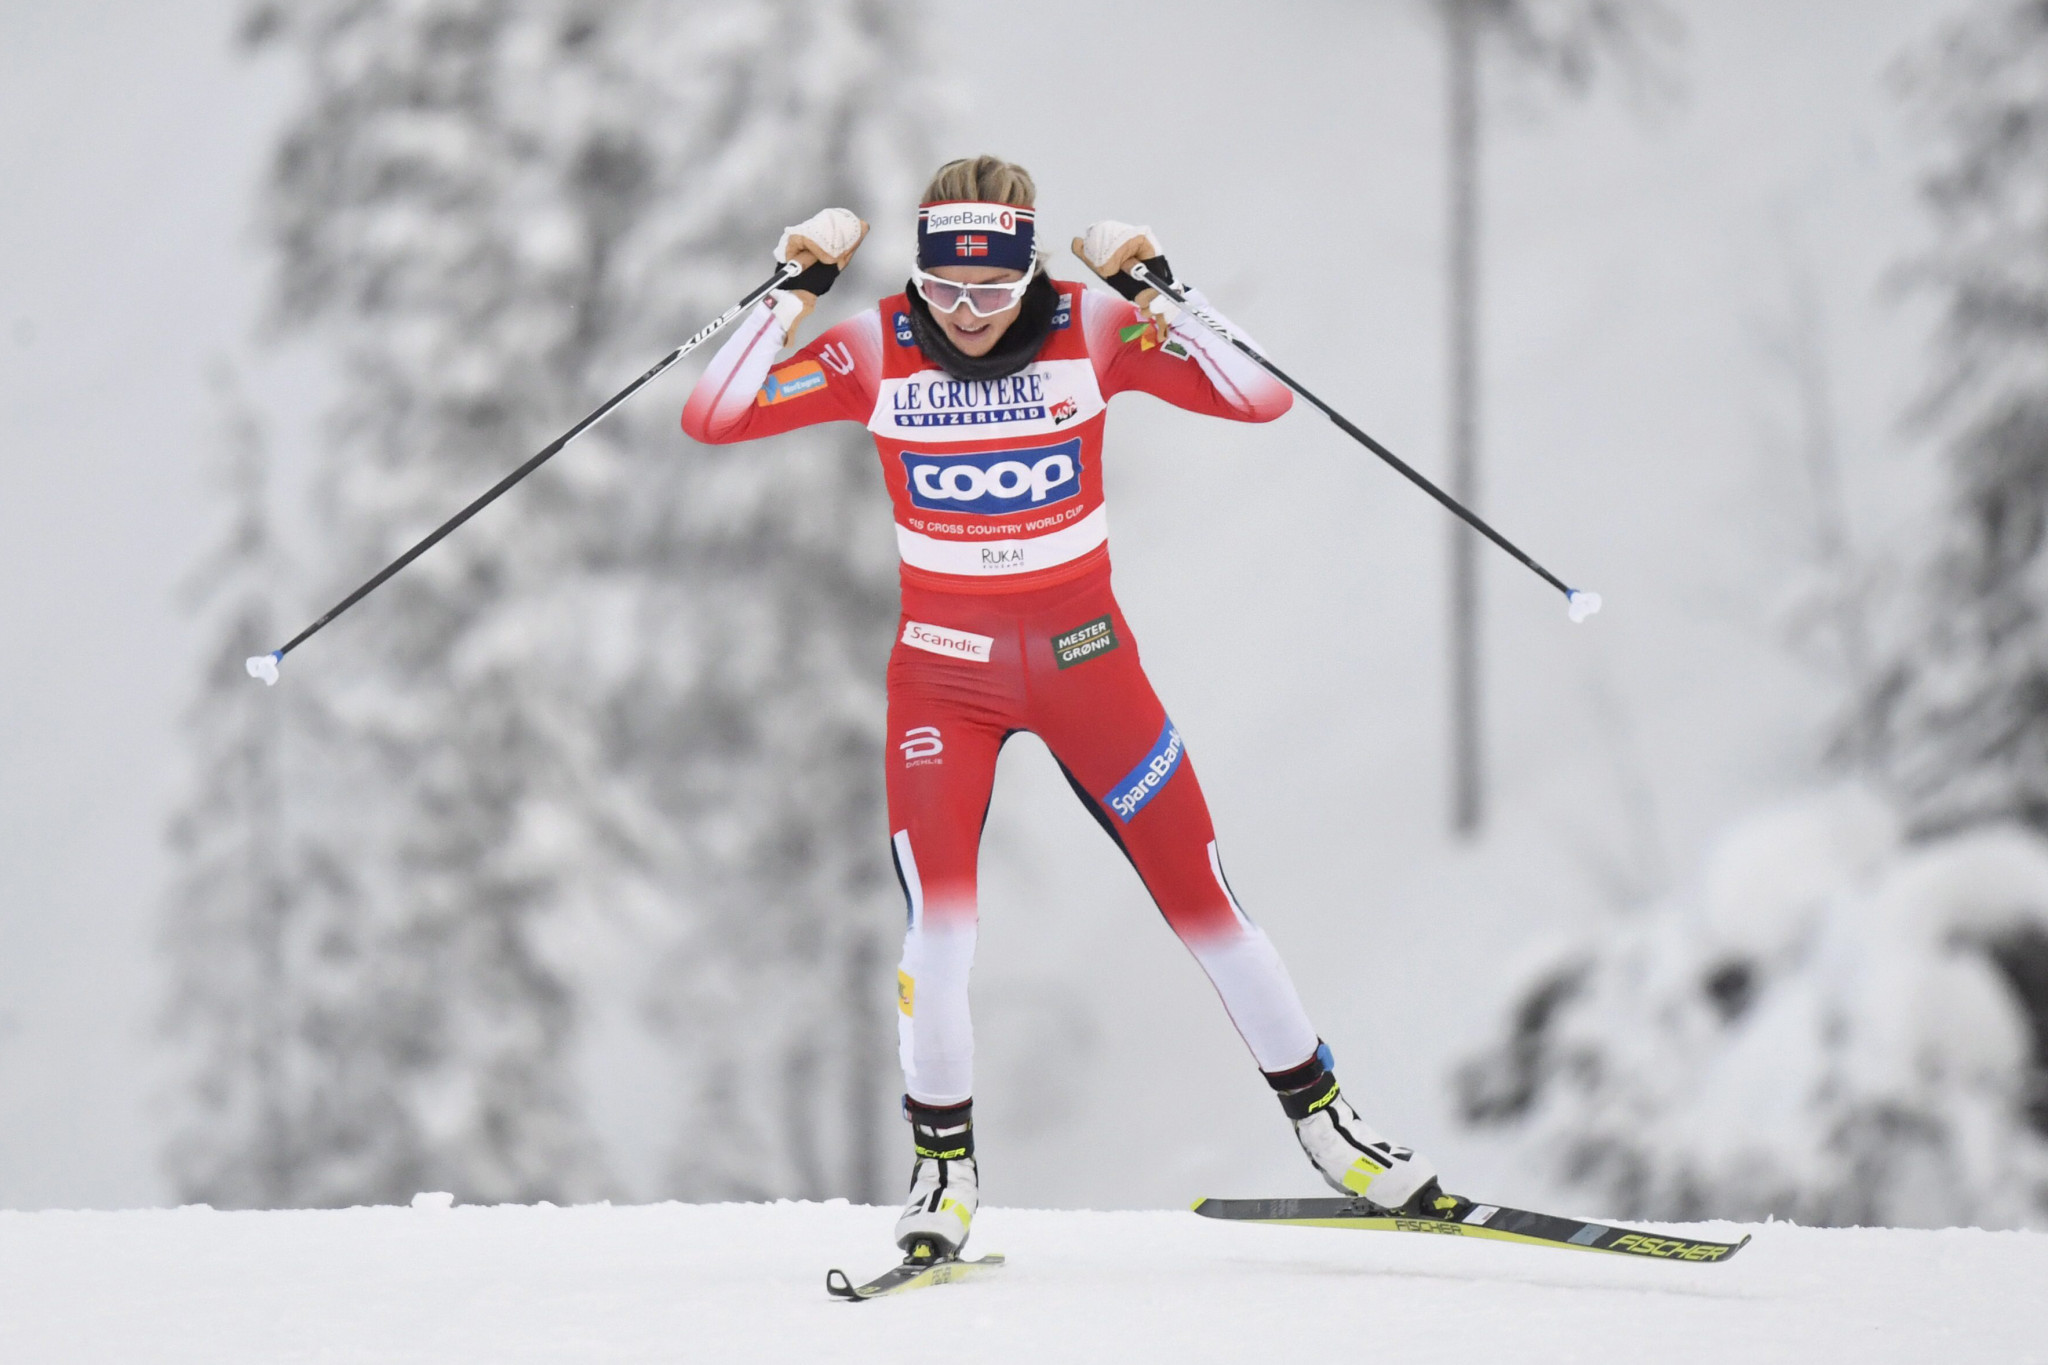 Therese Johaug eased to victory in the women's pursuit event in the FIS Cross-Country World Cup at Ruka ©Getty Images